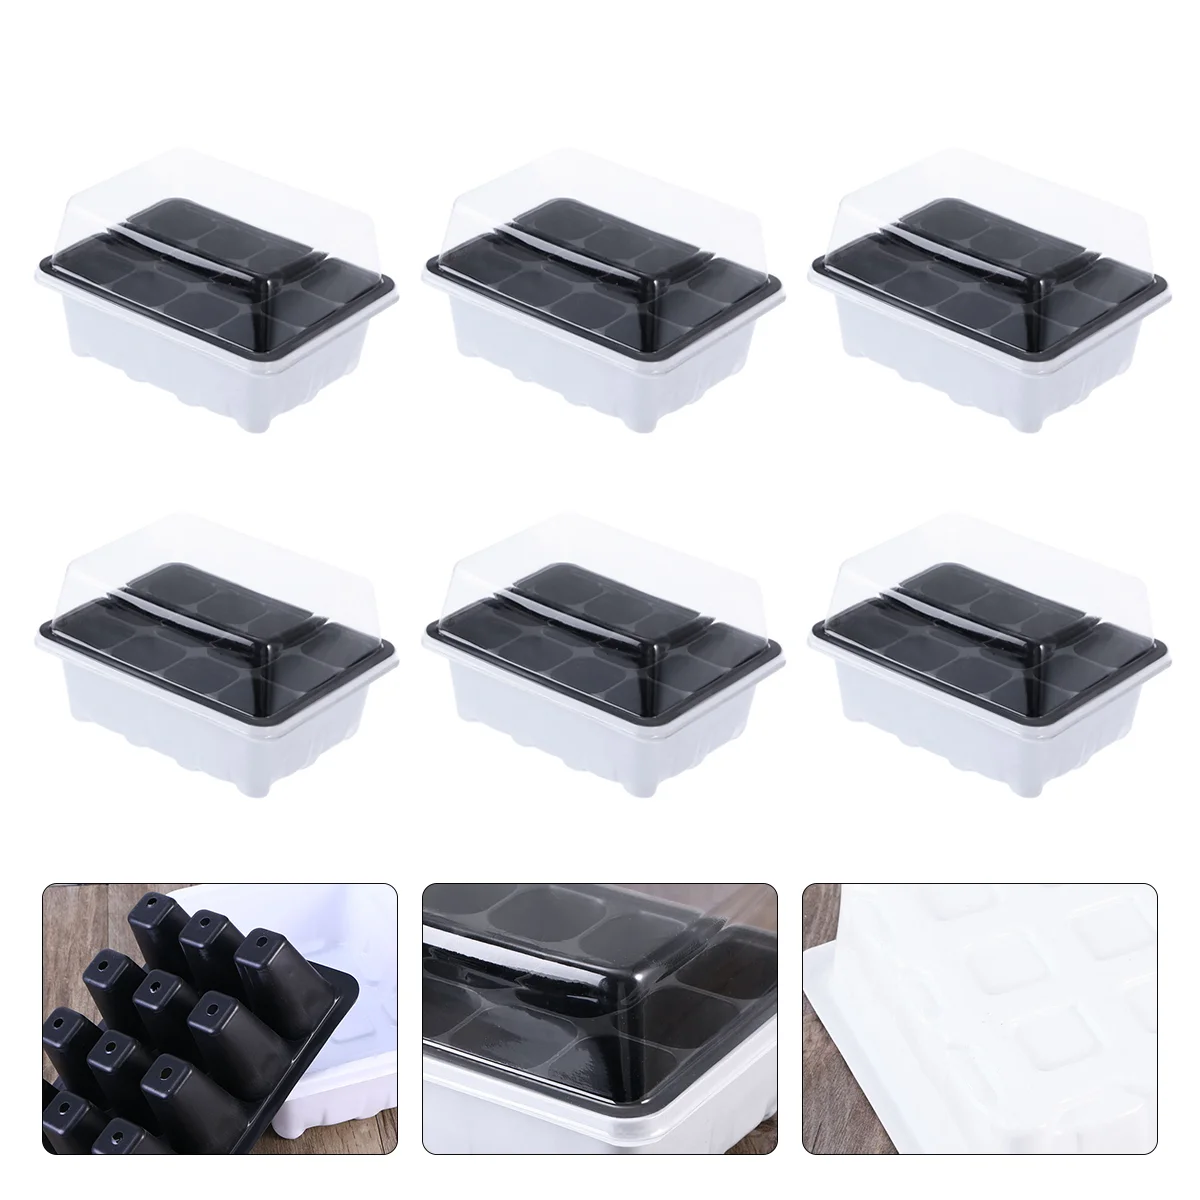 

Tray Trays Starter Growing Grow Potting Starting Box Garden Germination Kits Greenhouse Kit Brussel Station Sprout Vegetable